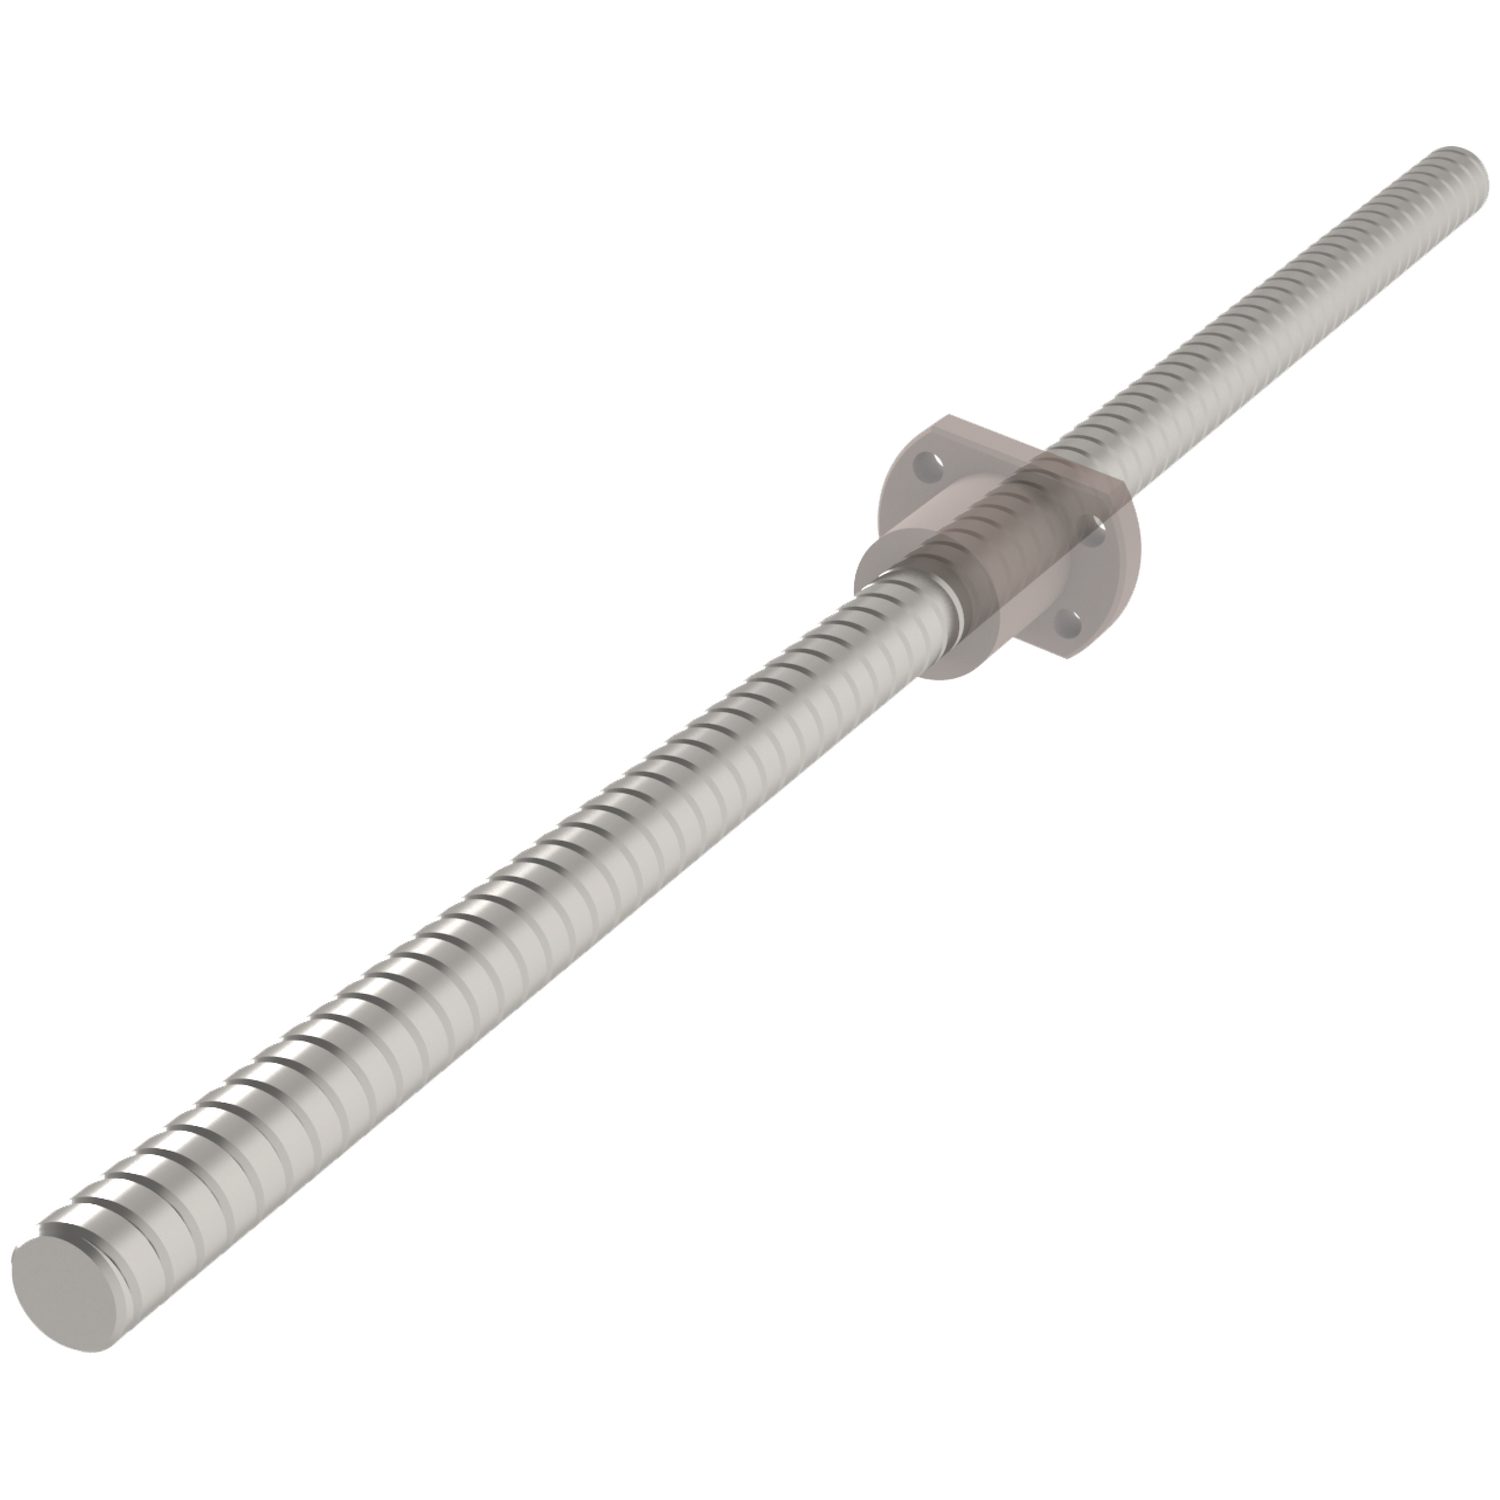 High Helix Lead Screws - Stainless High precision lead screws with flanged nut. Stainless steel.